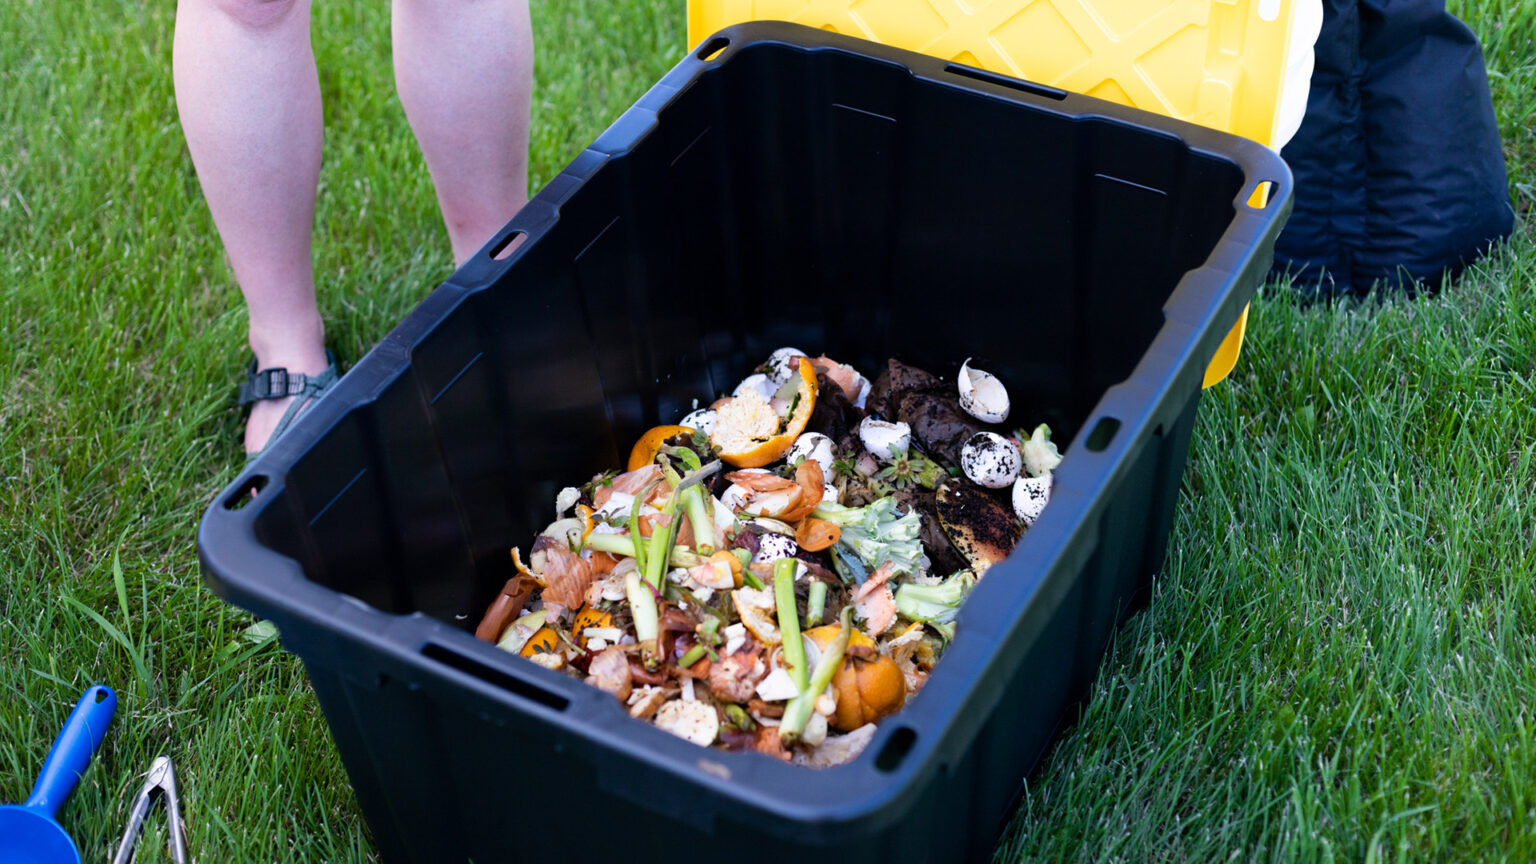 A plastic storage container partially filled with scraps of discarded food sits on a lawn.